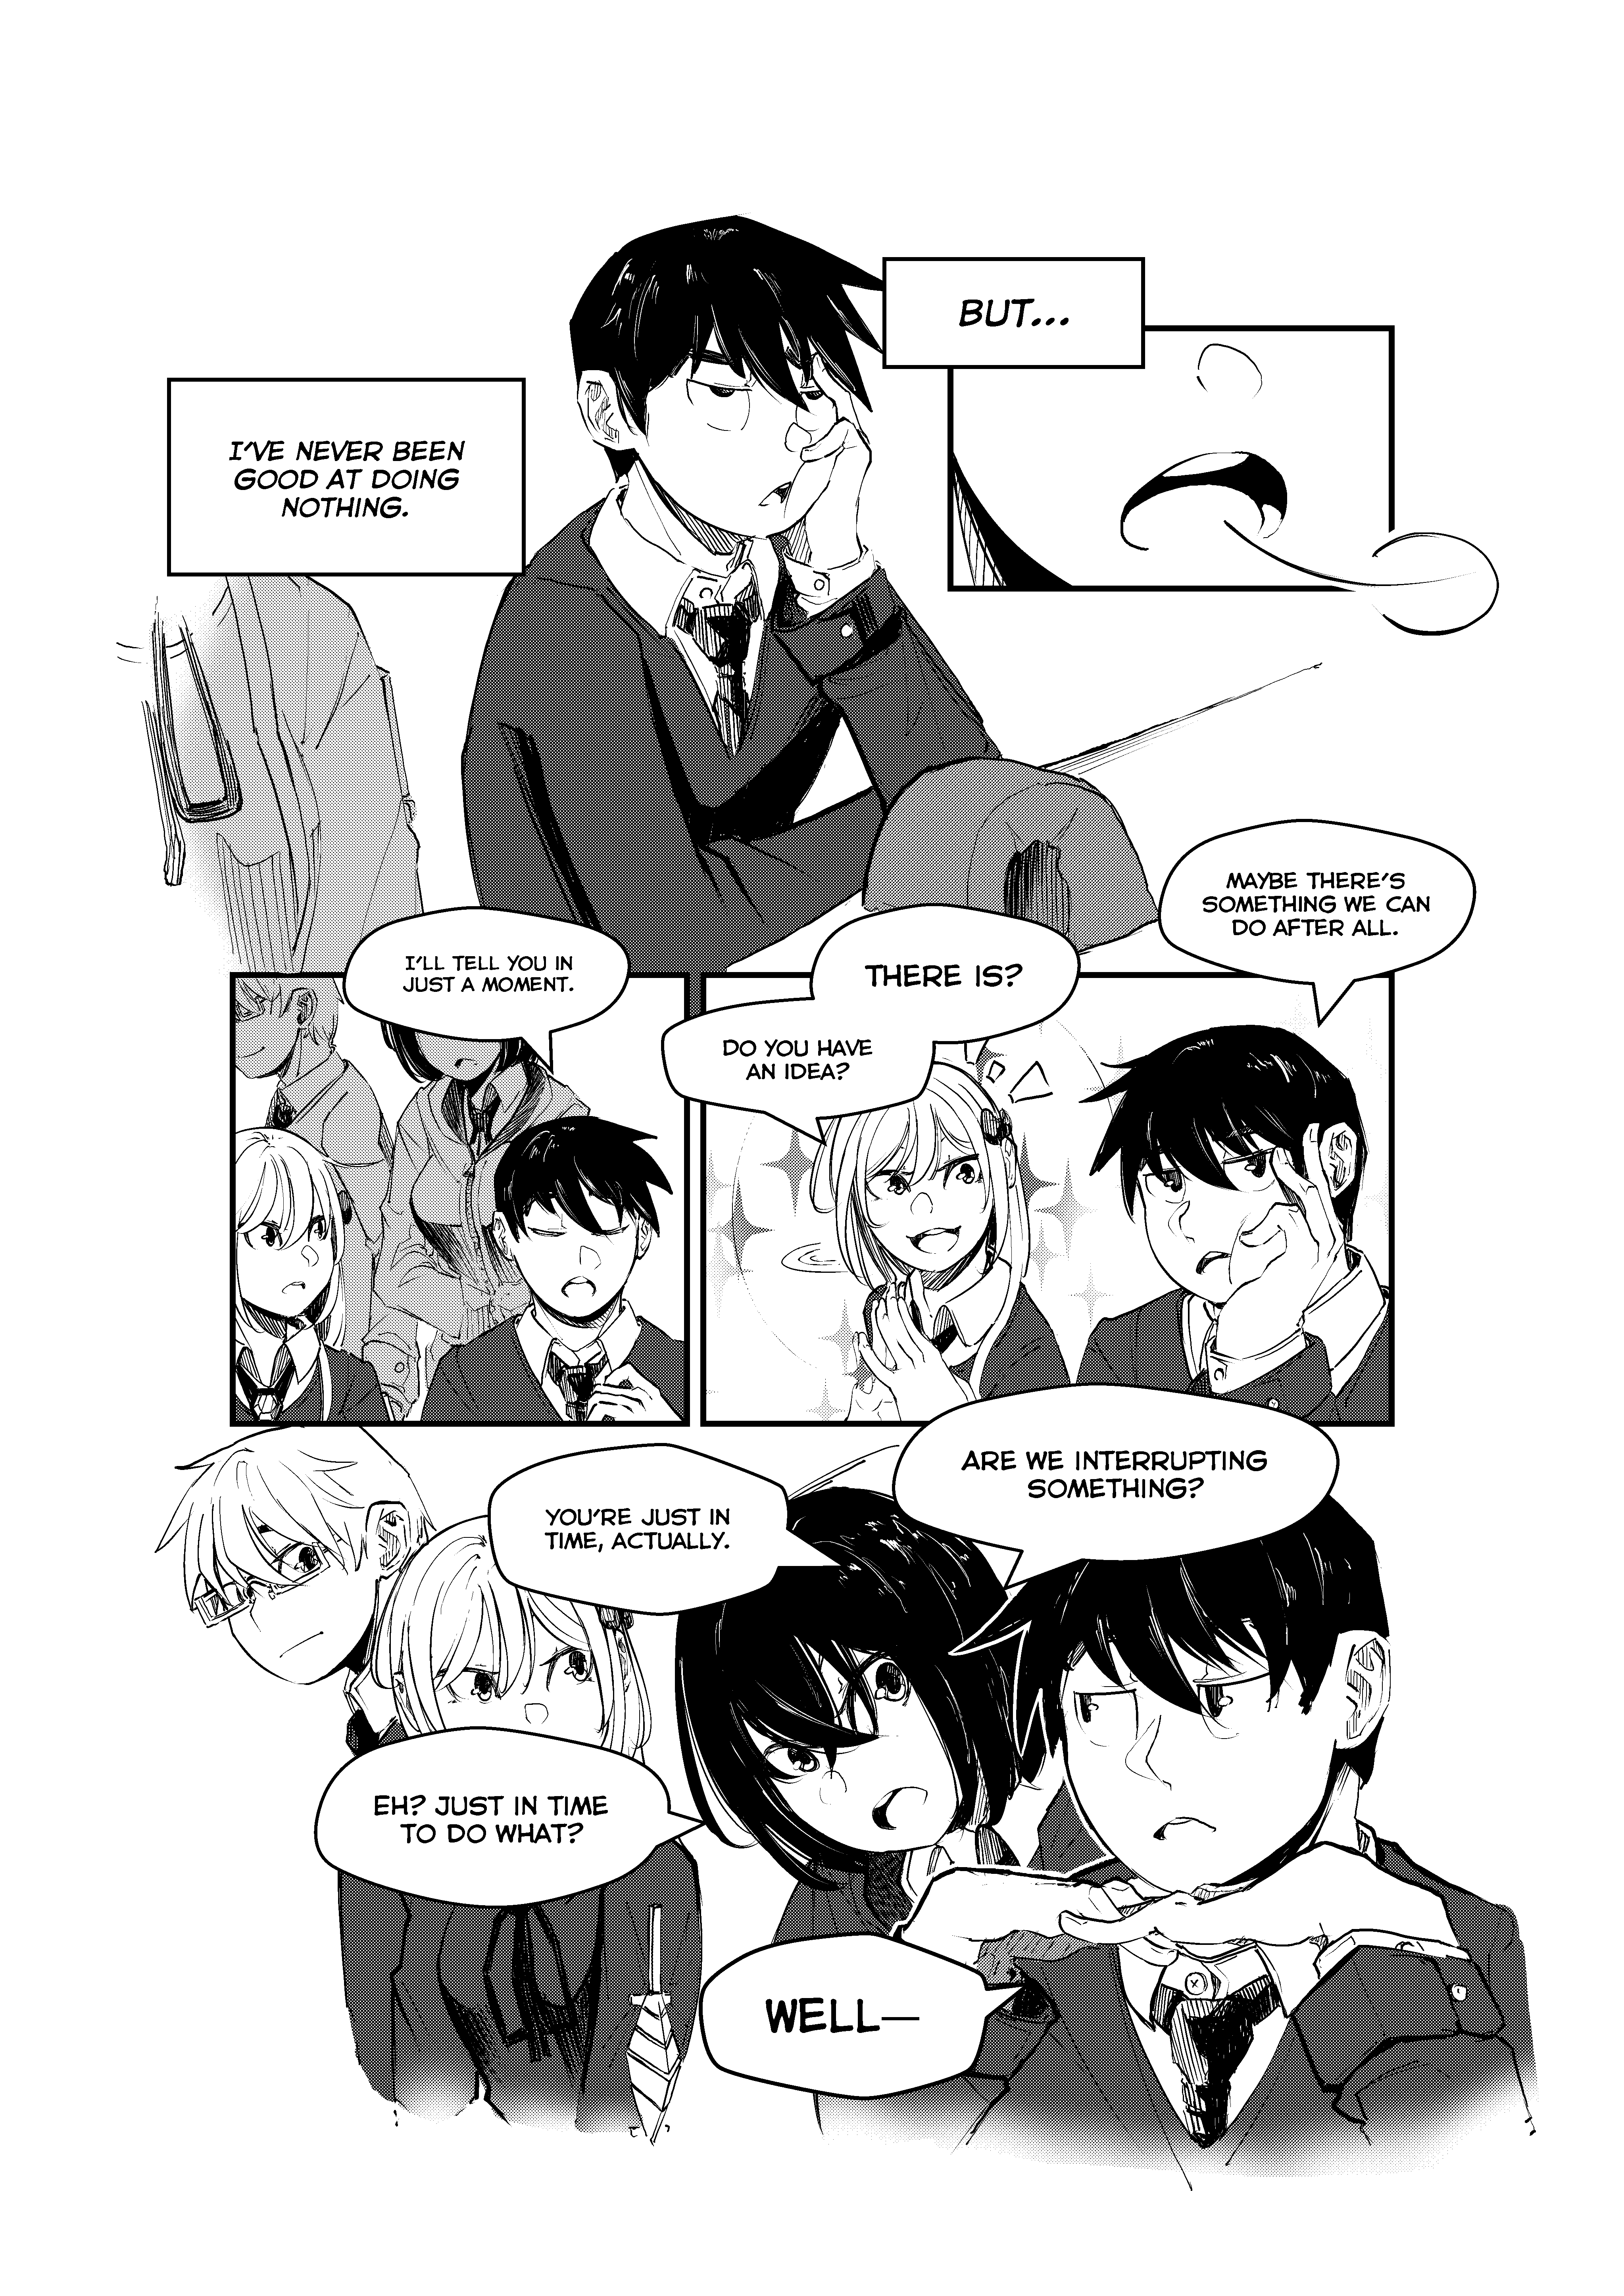 Opposites In Disguise - 16 page 12-3397c78f